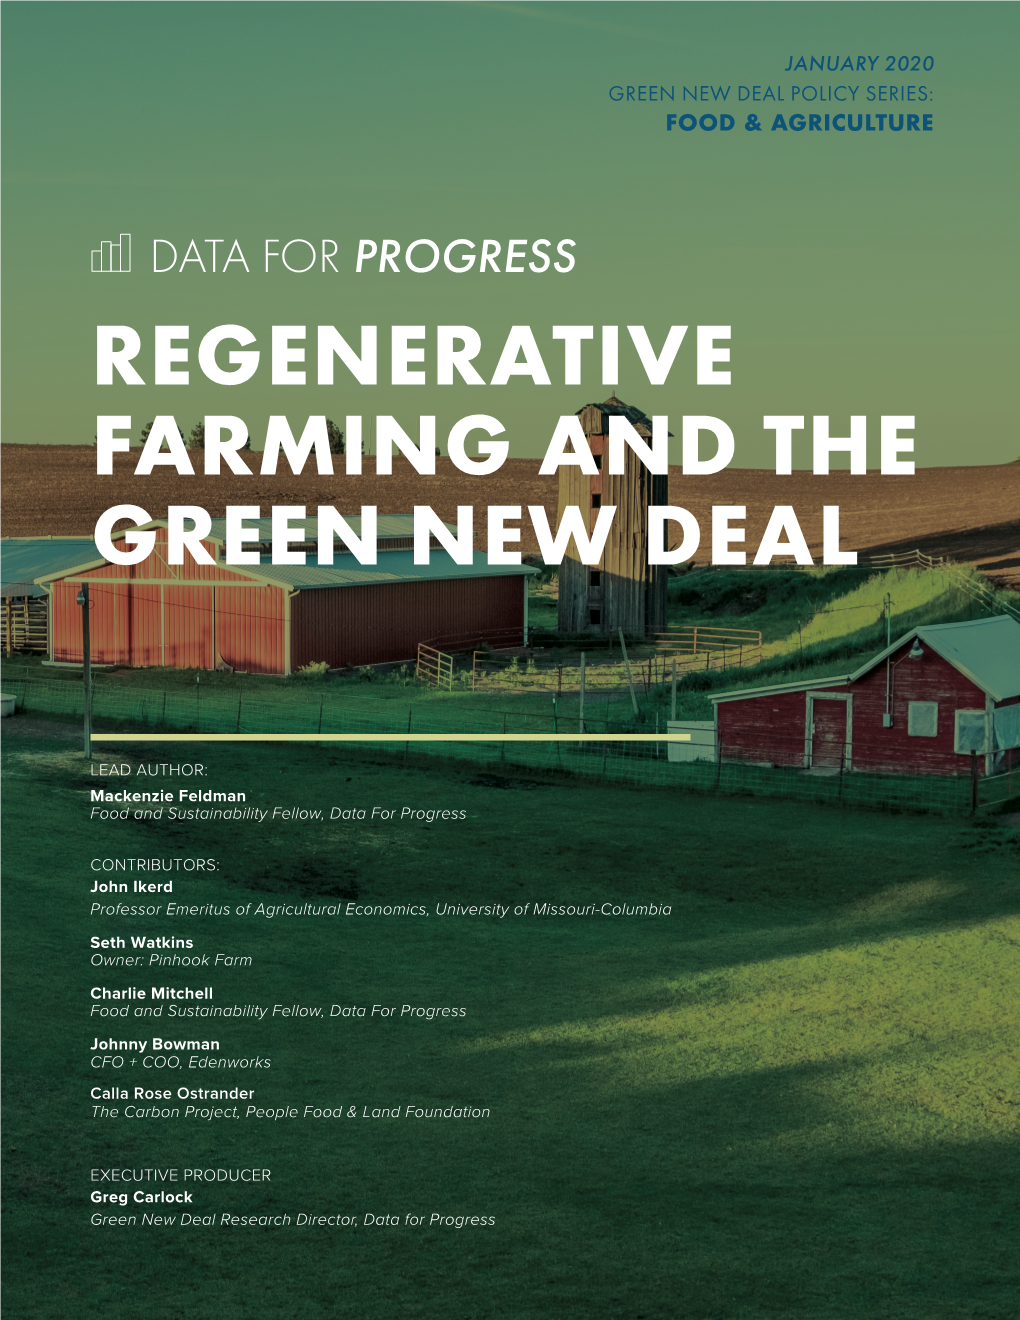 Regenerative Farming and the Green New Deal